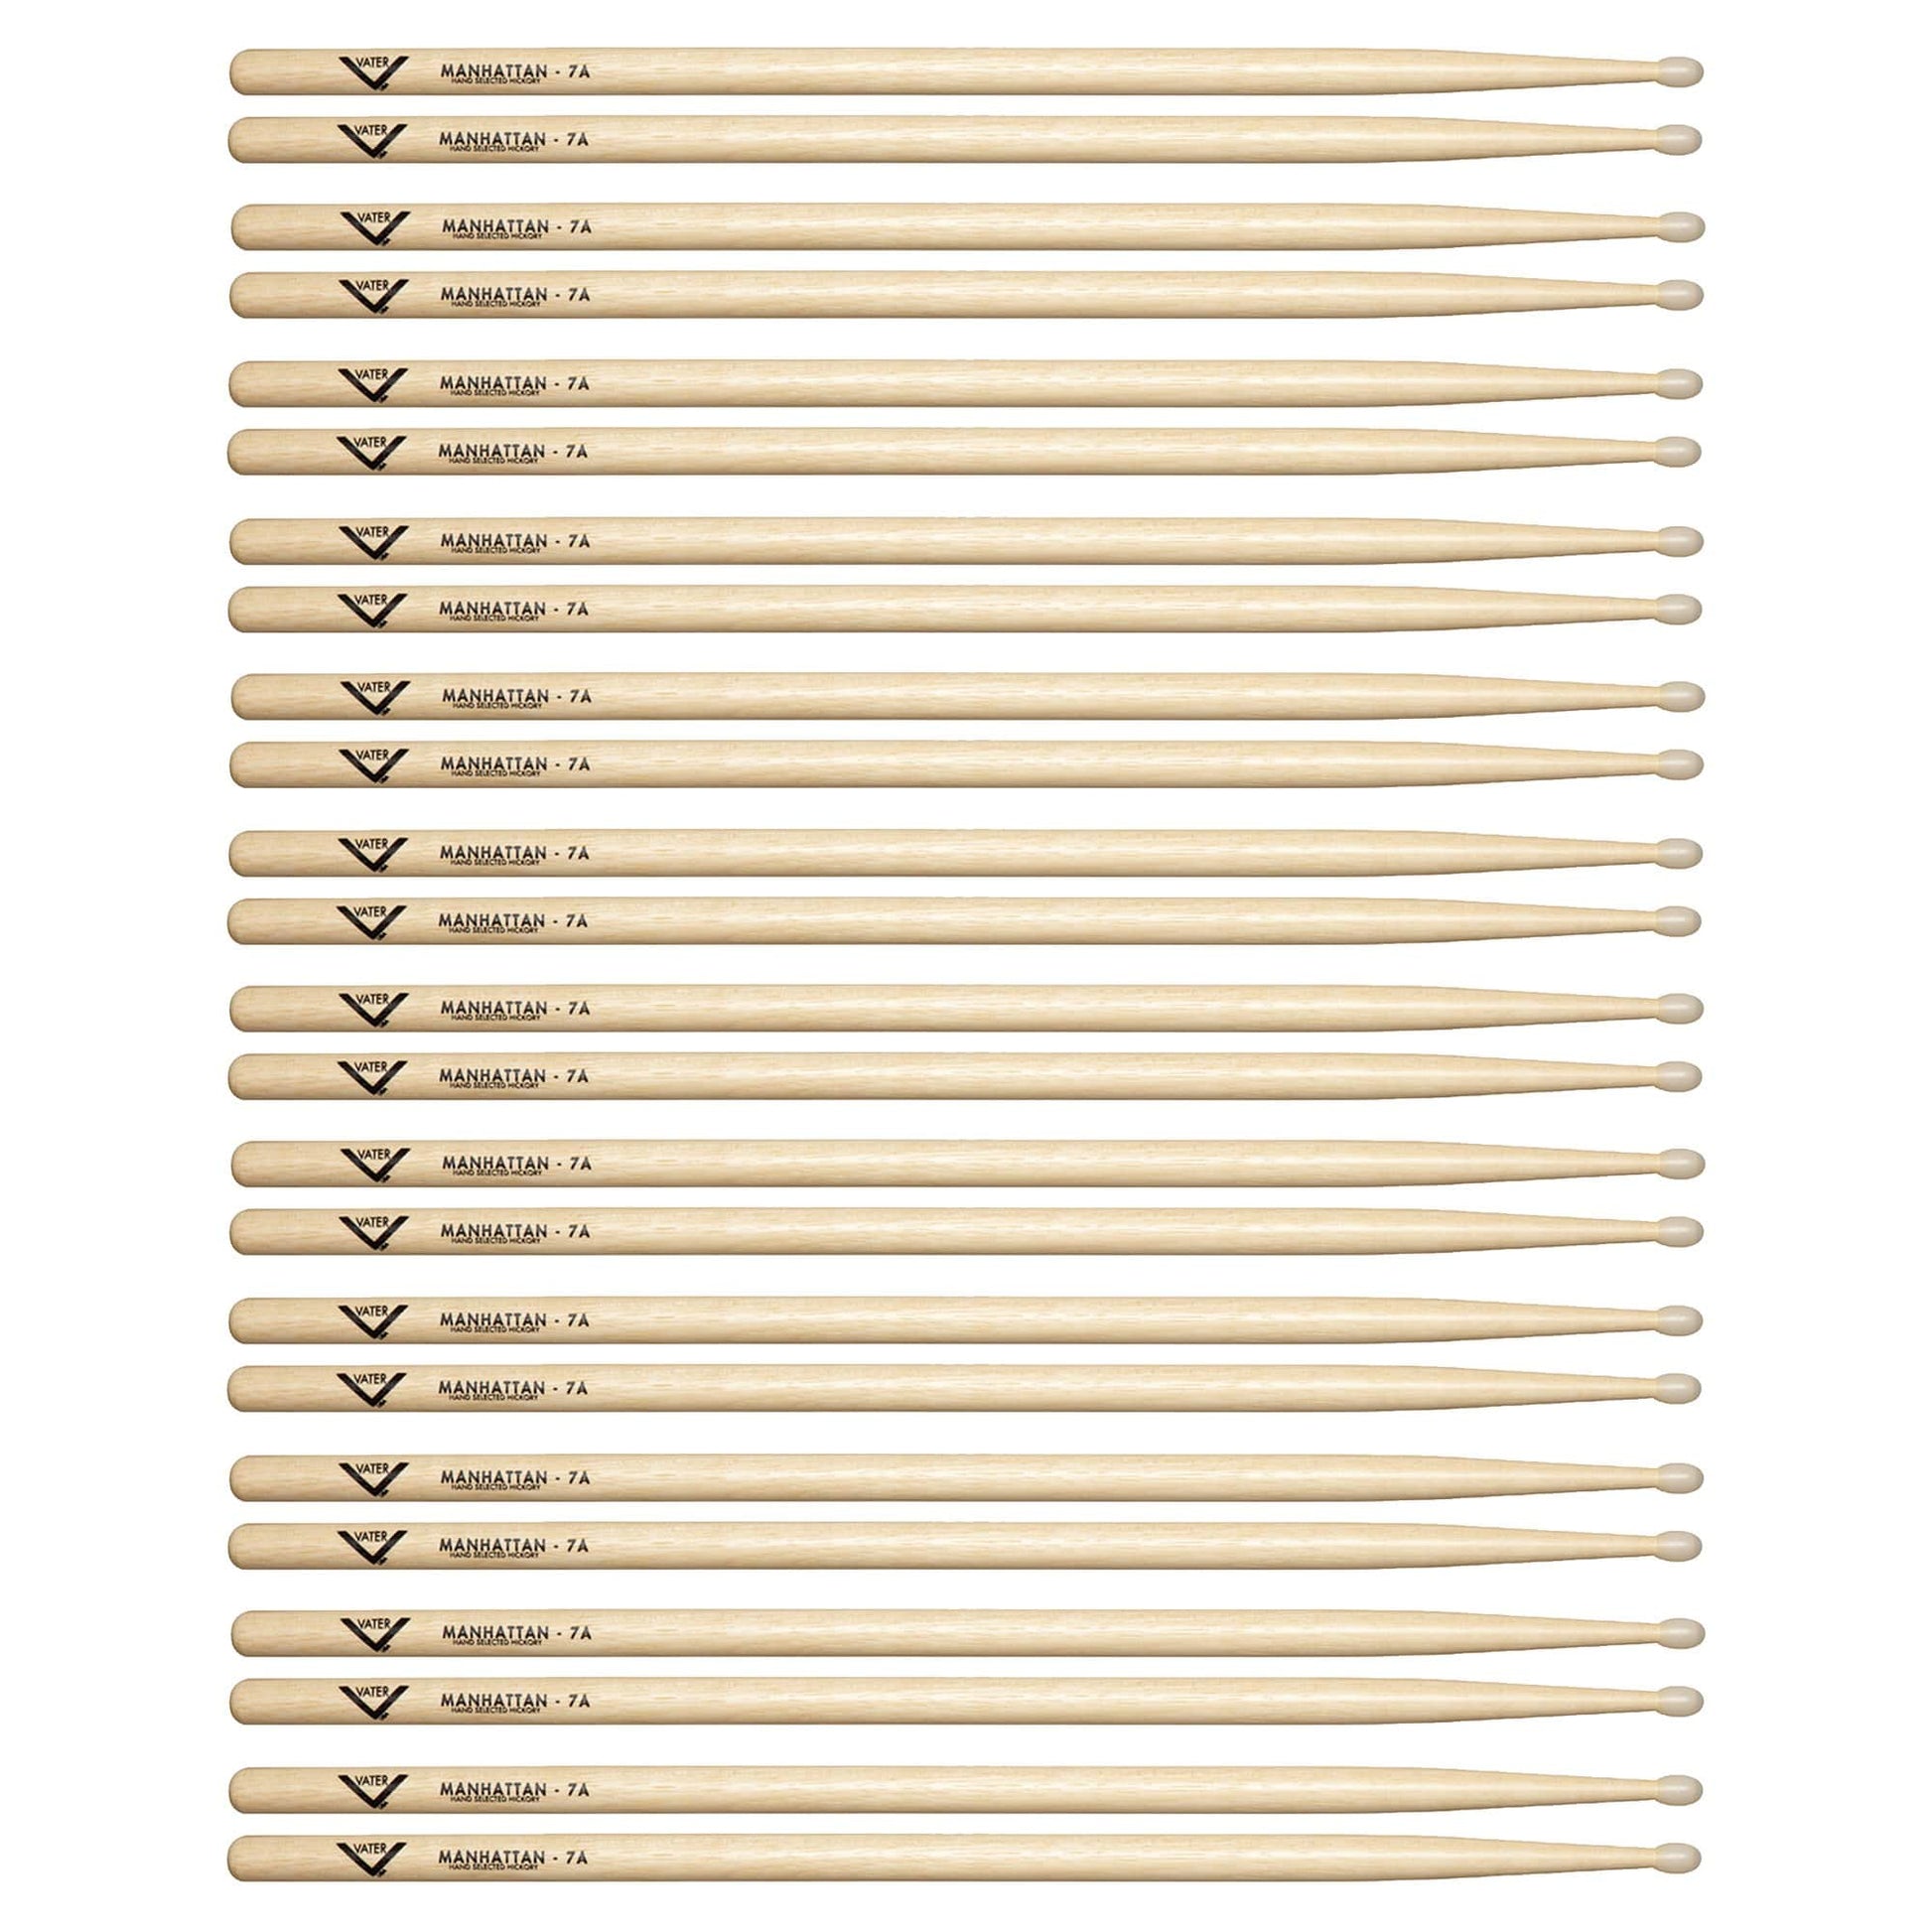 Vater Hickory Manhattan 7A Nylon Tip Drum Sticks (12 Pair Bundle) Drums and Percussion / Parts and Accessories / Drum Sticks and Mallets